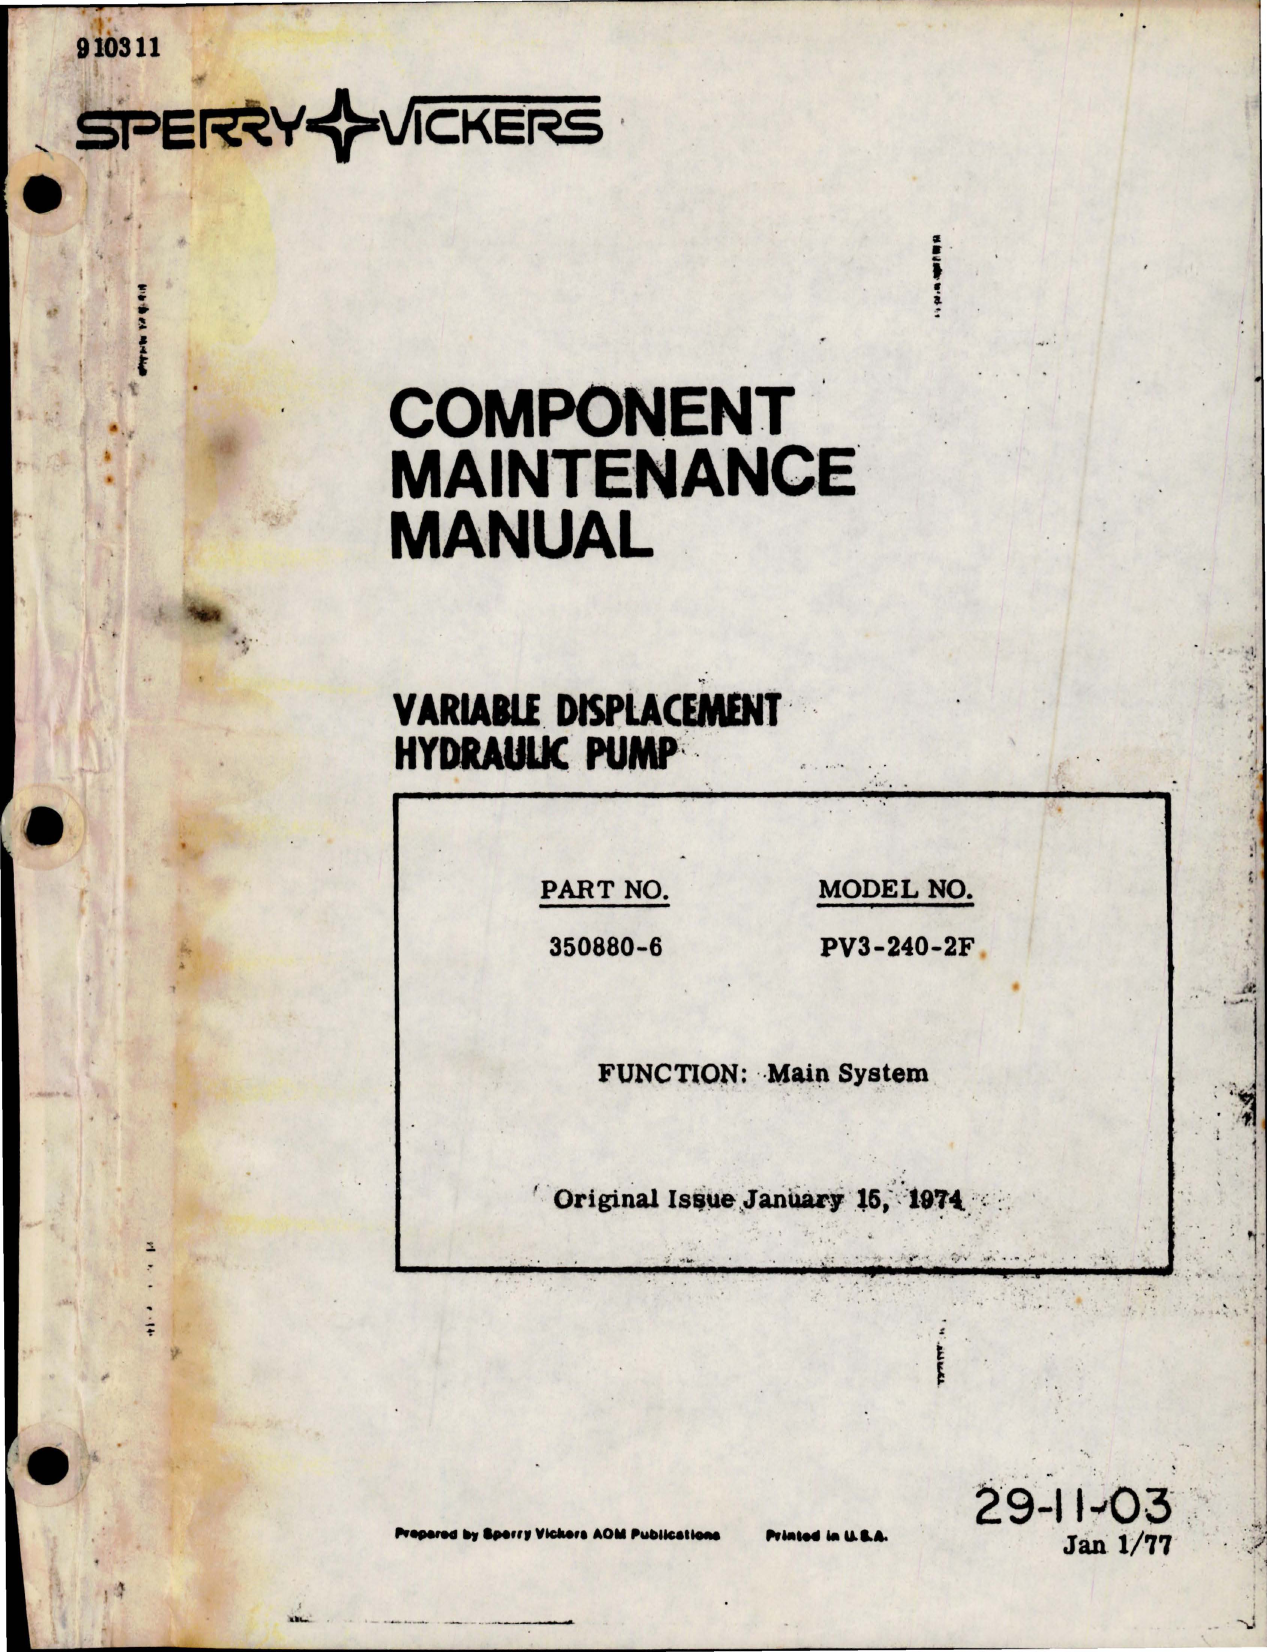 Sample page 1 from AirCorps Library document: Maintenance Manual for Variable Displacement Hydraulic Pump - Parts 350880-6 - Model PV3-240-2F